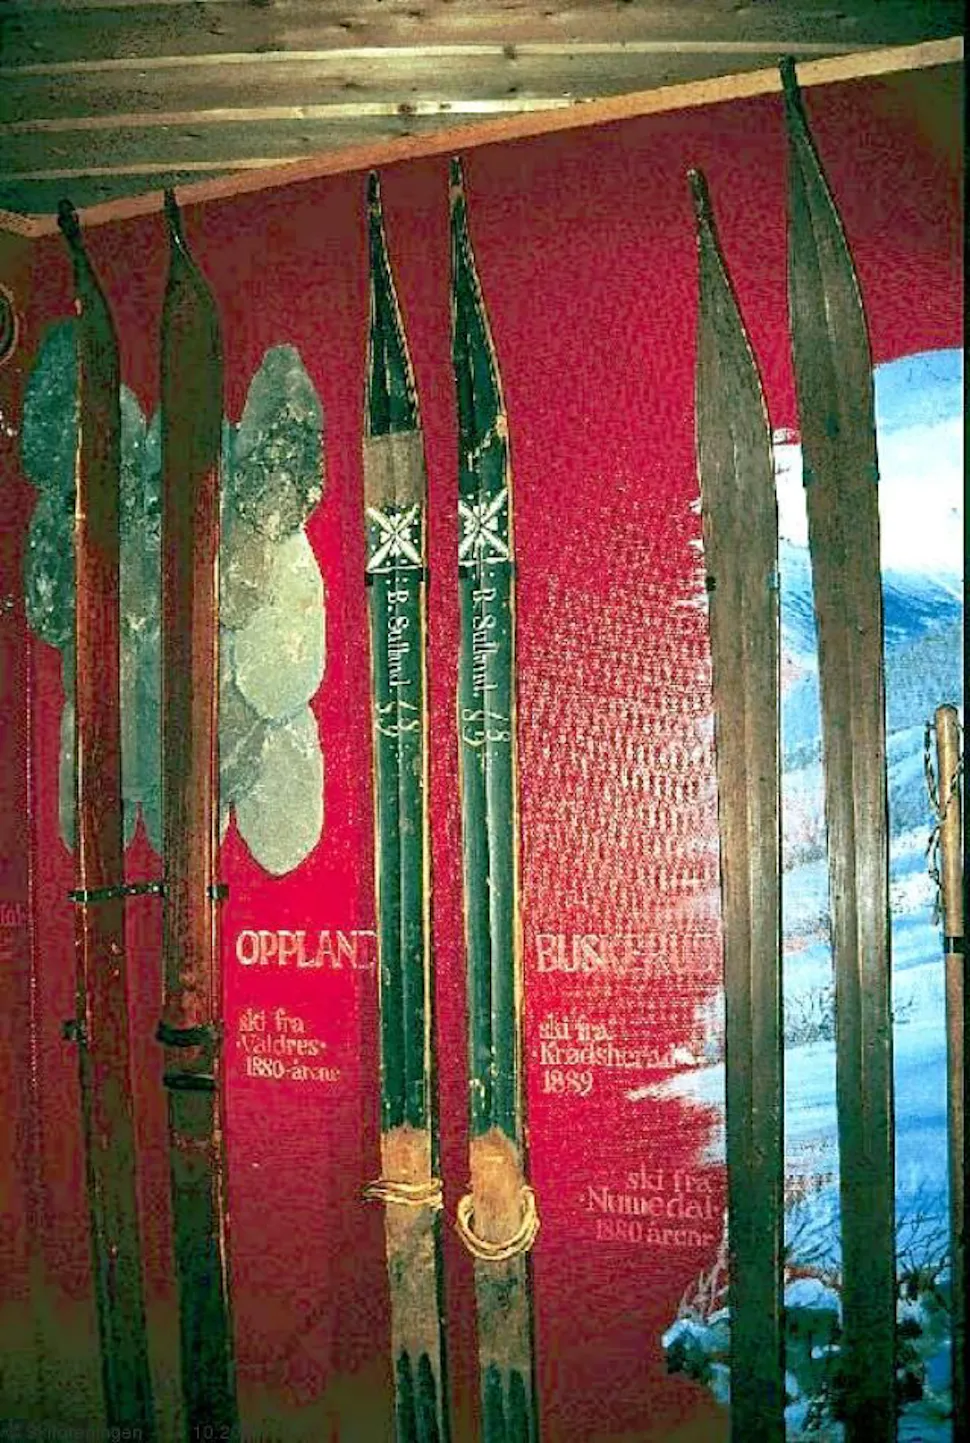 Old skis from the Ski Museum in Holmenkollen